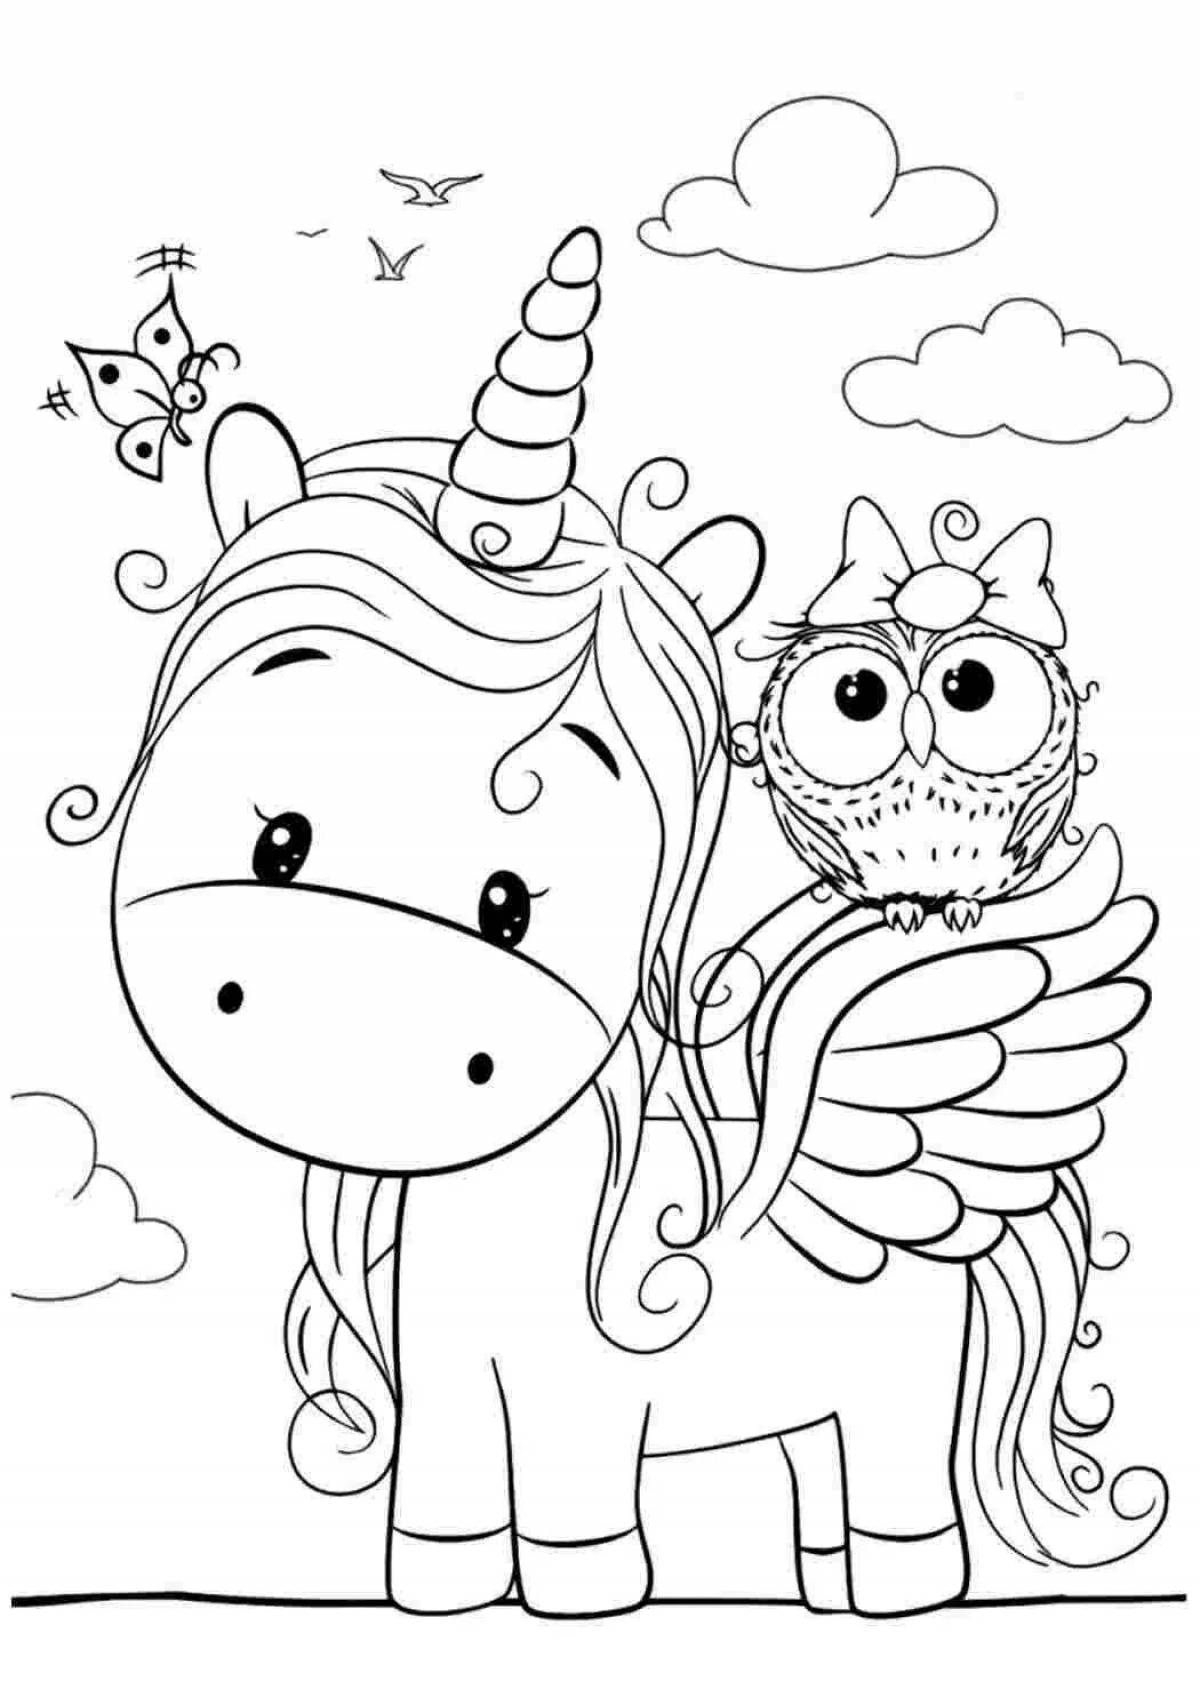 Sweet coloring for girls 7 years old animals